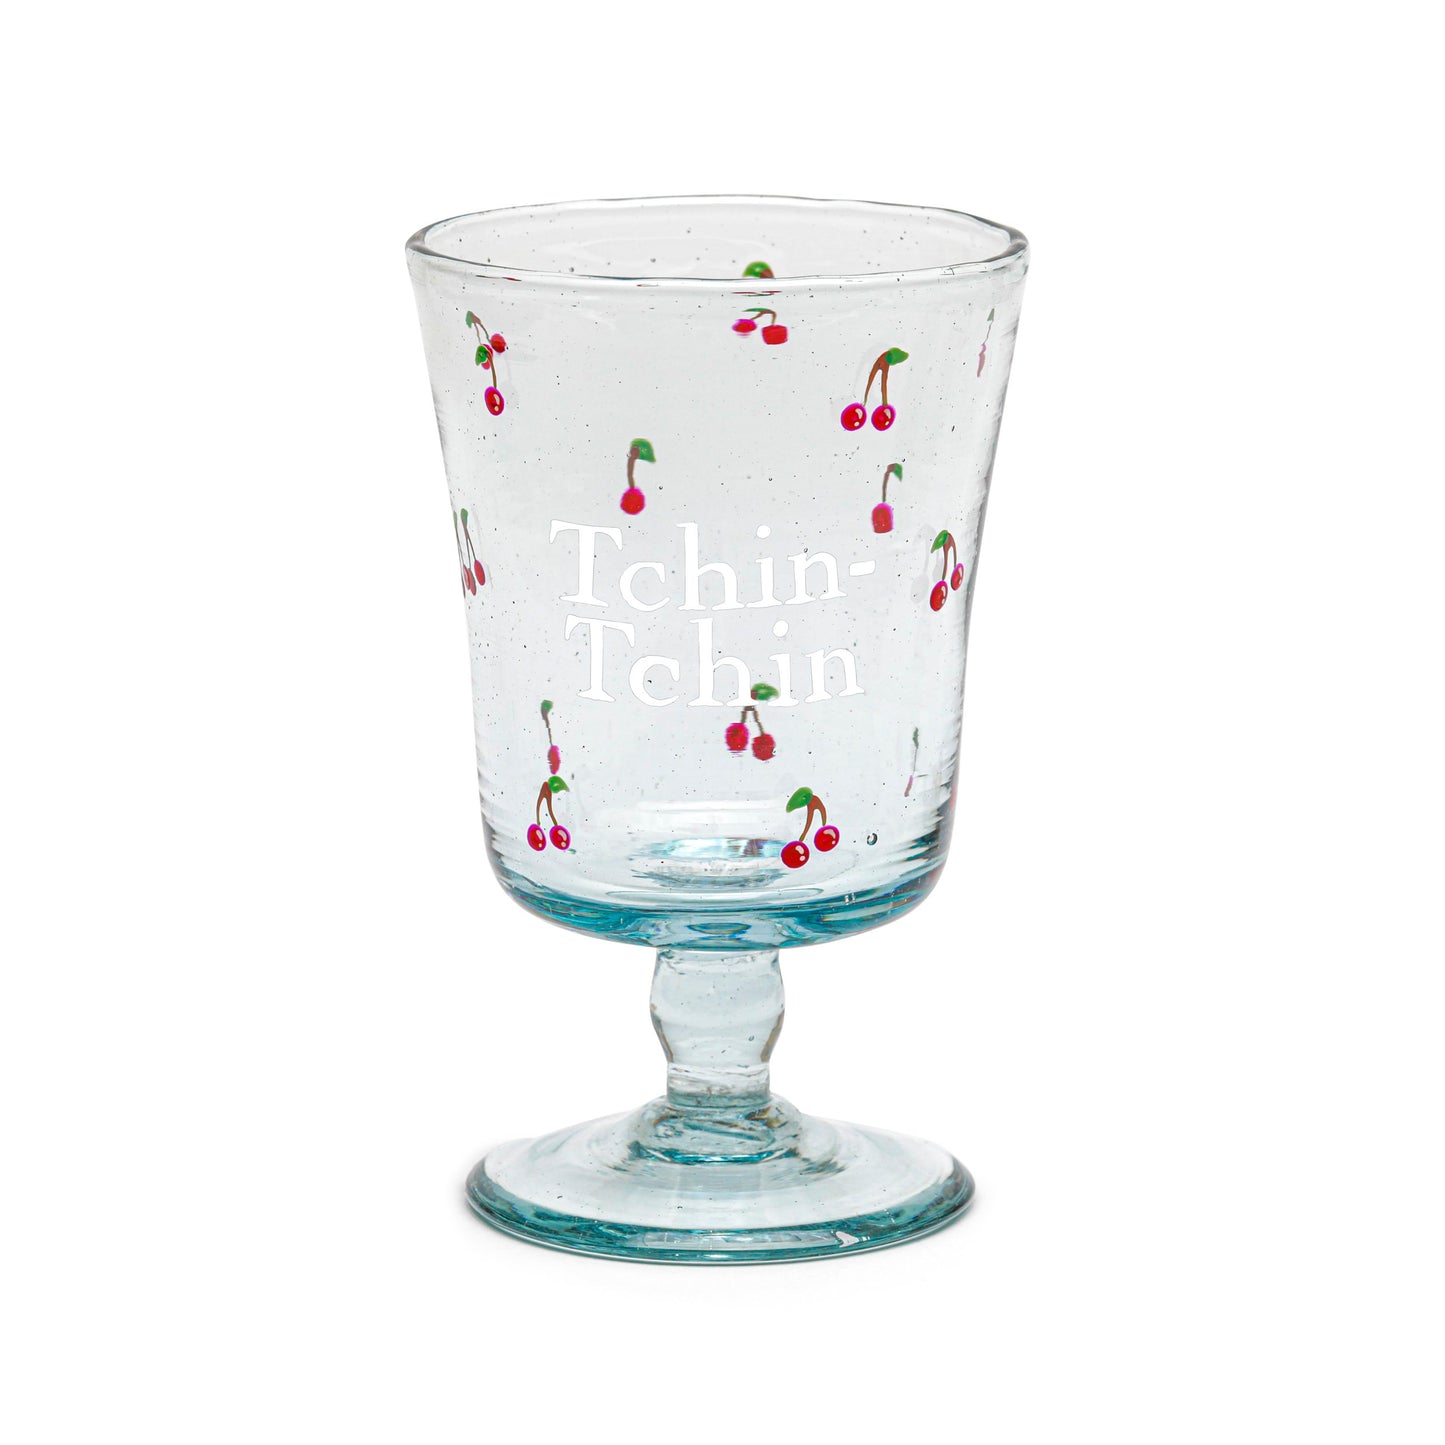 Hand painted wine glass | ALL IN CHERRIES: TCHIN-TCHIN